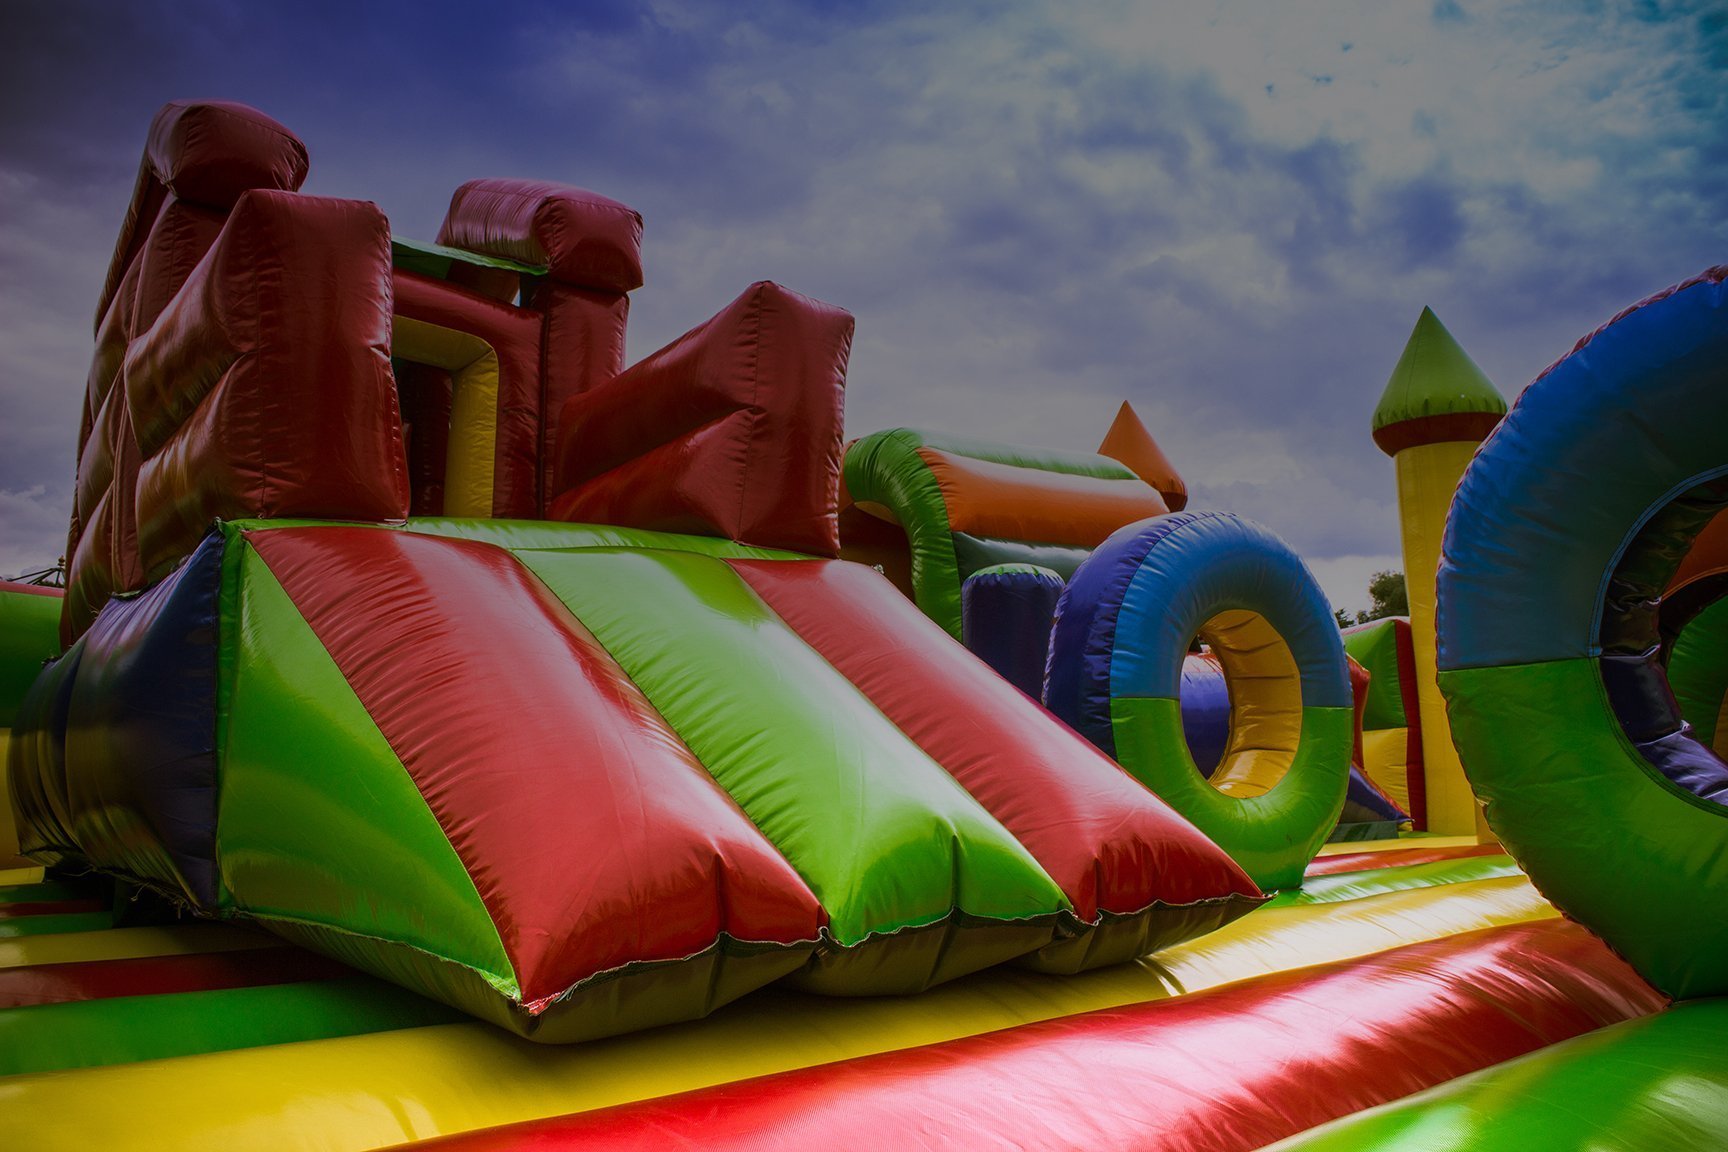 Discover the best inflatable rentals in Tulsa with Show It Off! Bounce houses, water slides, and more to make your event unforgettable.